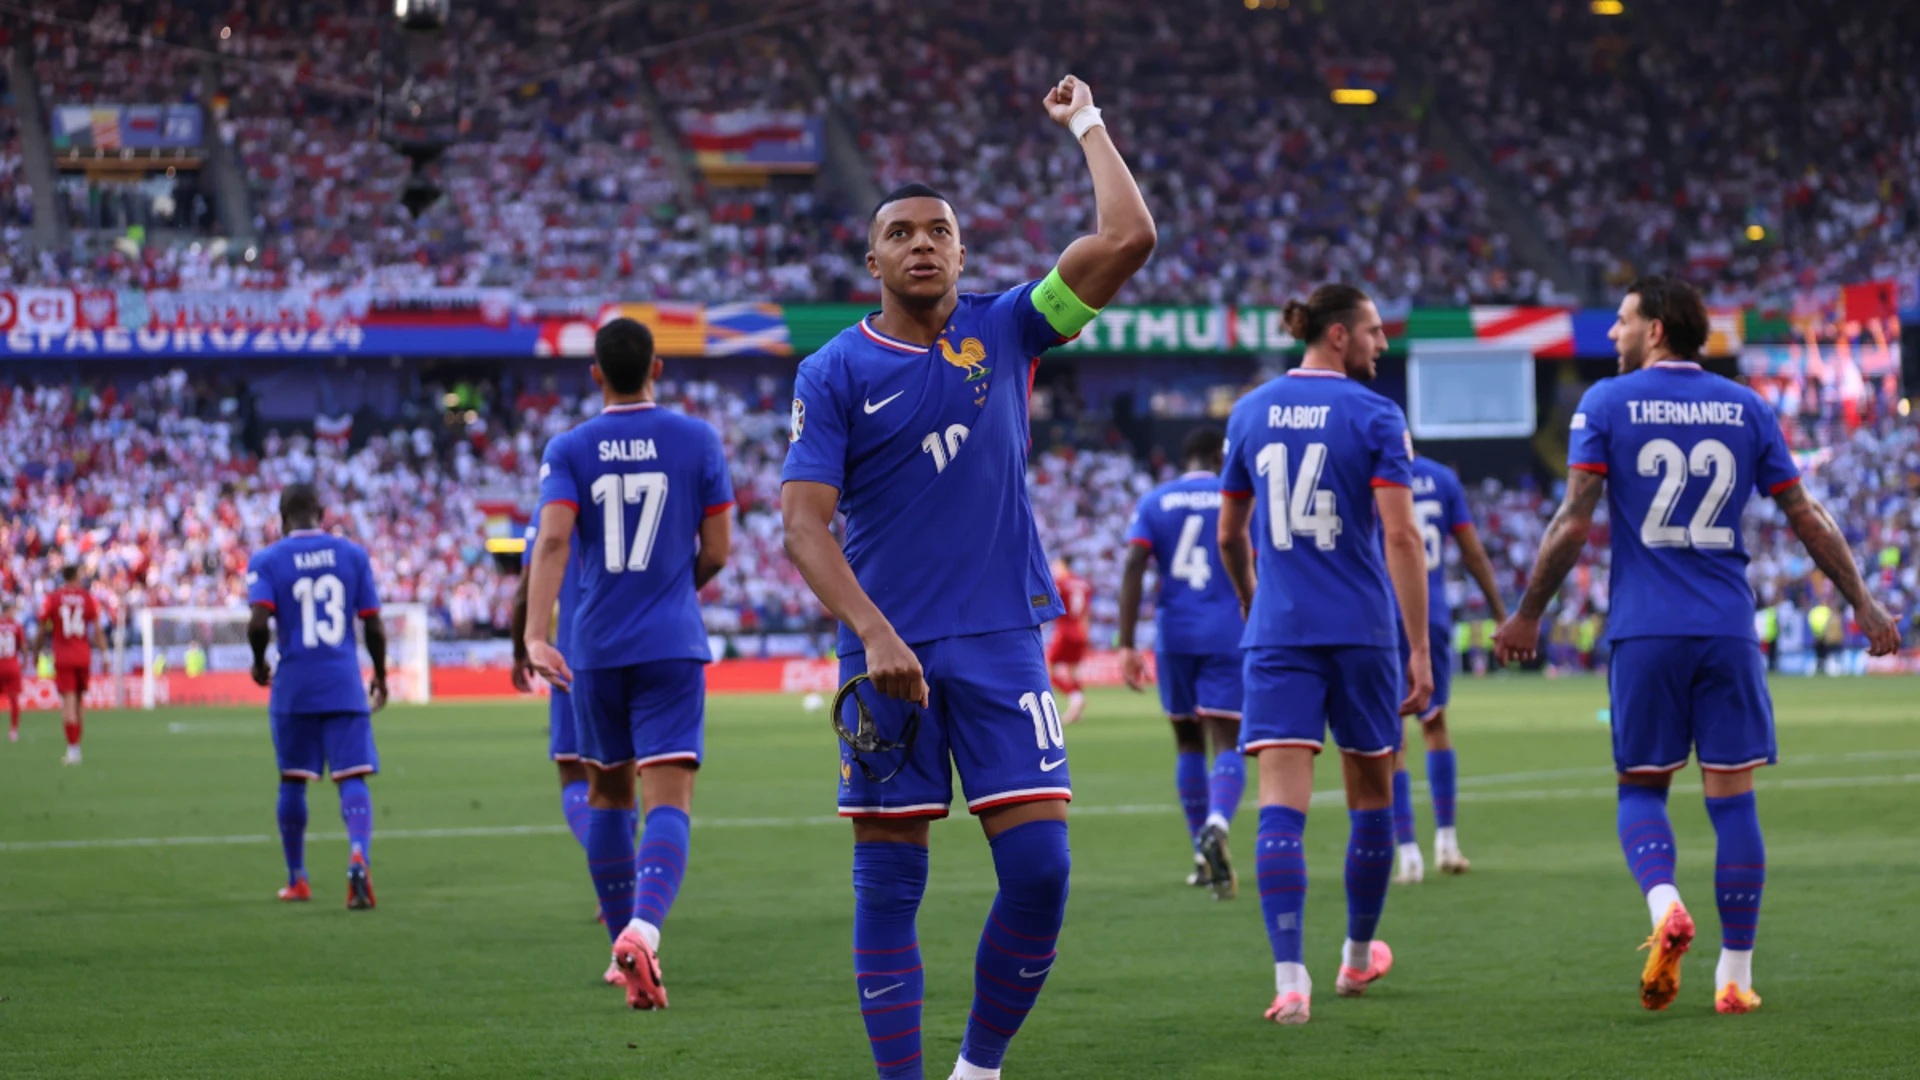 France confident goal-shy strikers will come good